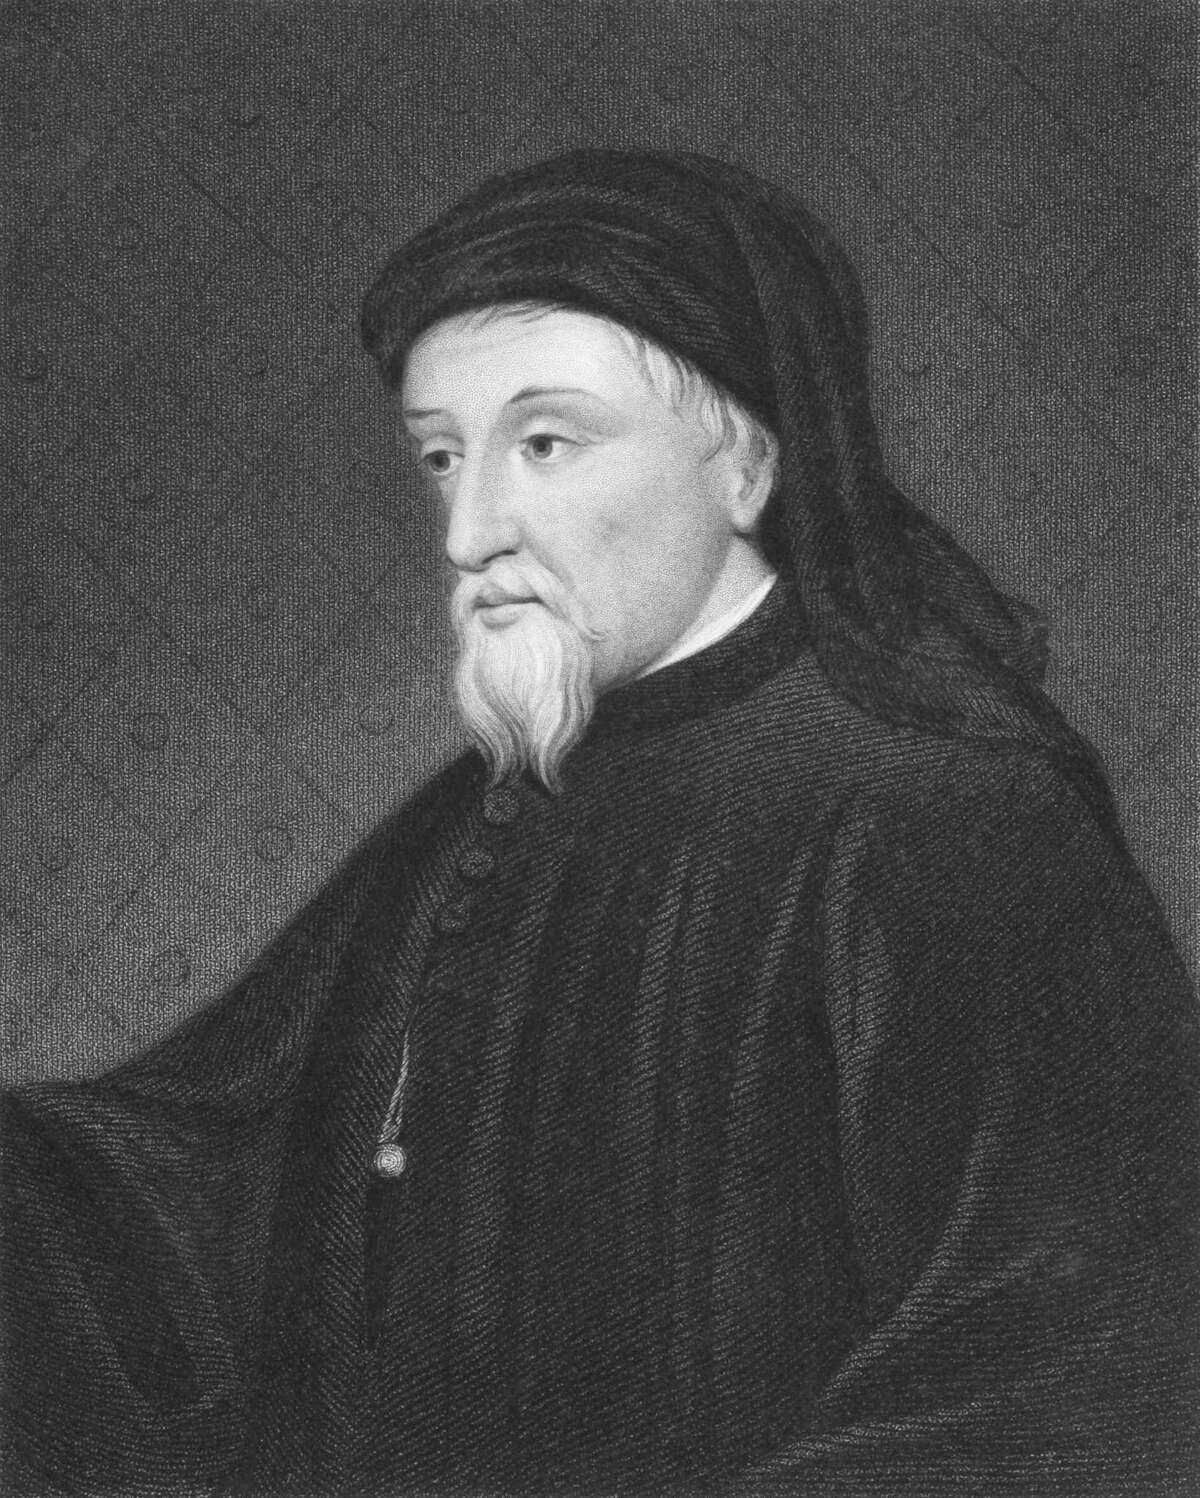 Portrait of author and poet Geoffrey Chaucer